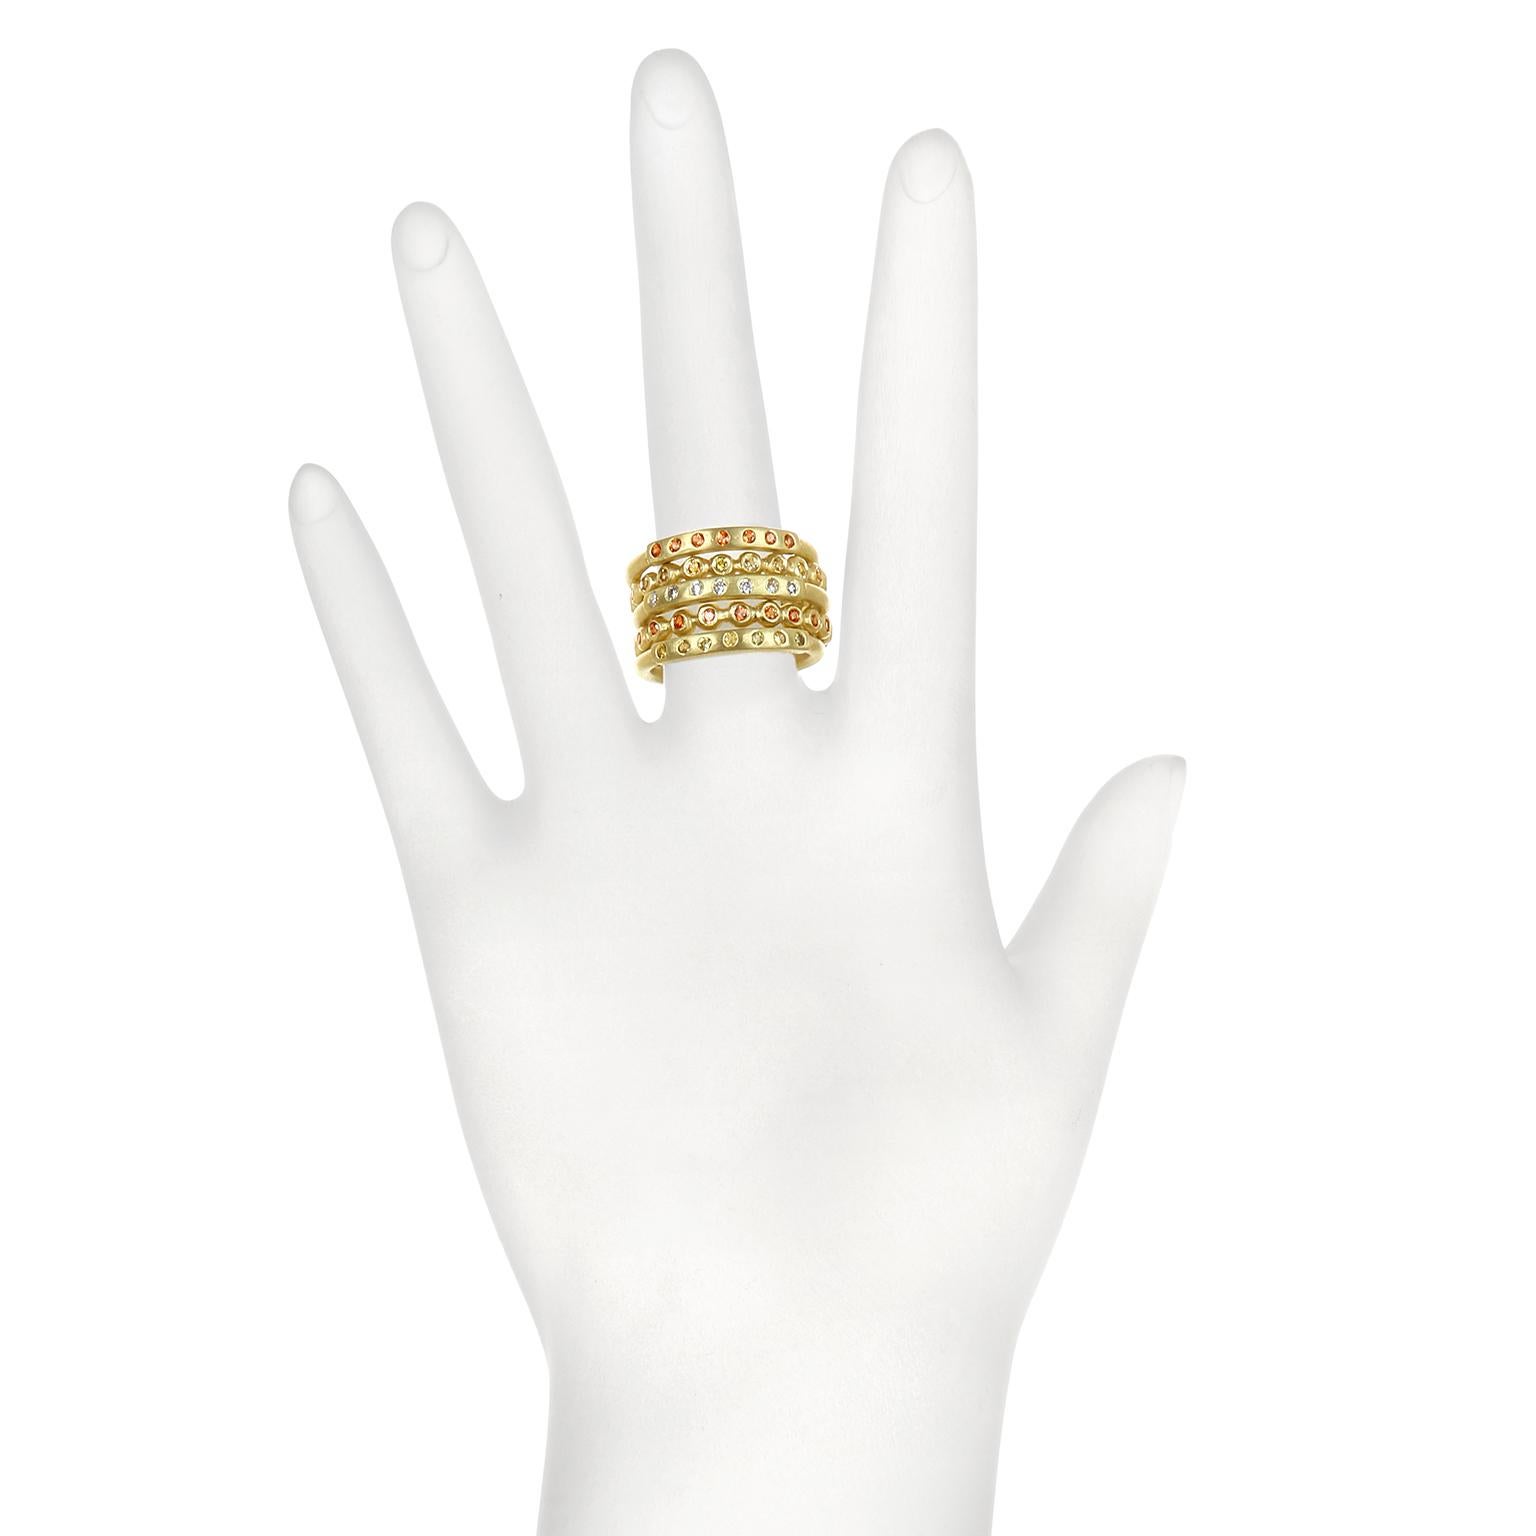 This 18k Gold Diamond Bar Stack Ring has a clean and modern feel.  The diamonds are burnished into the bar creating beautiful sparkle against the matte finish.  

Size 6.75
Qty 7 Diamonds = .11 cts.
Rings sold separately.

Signature Collection:  non